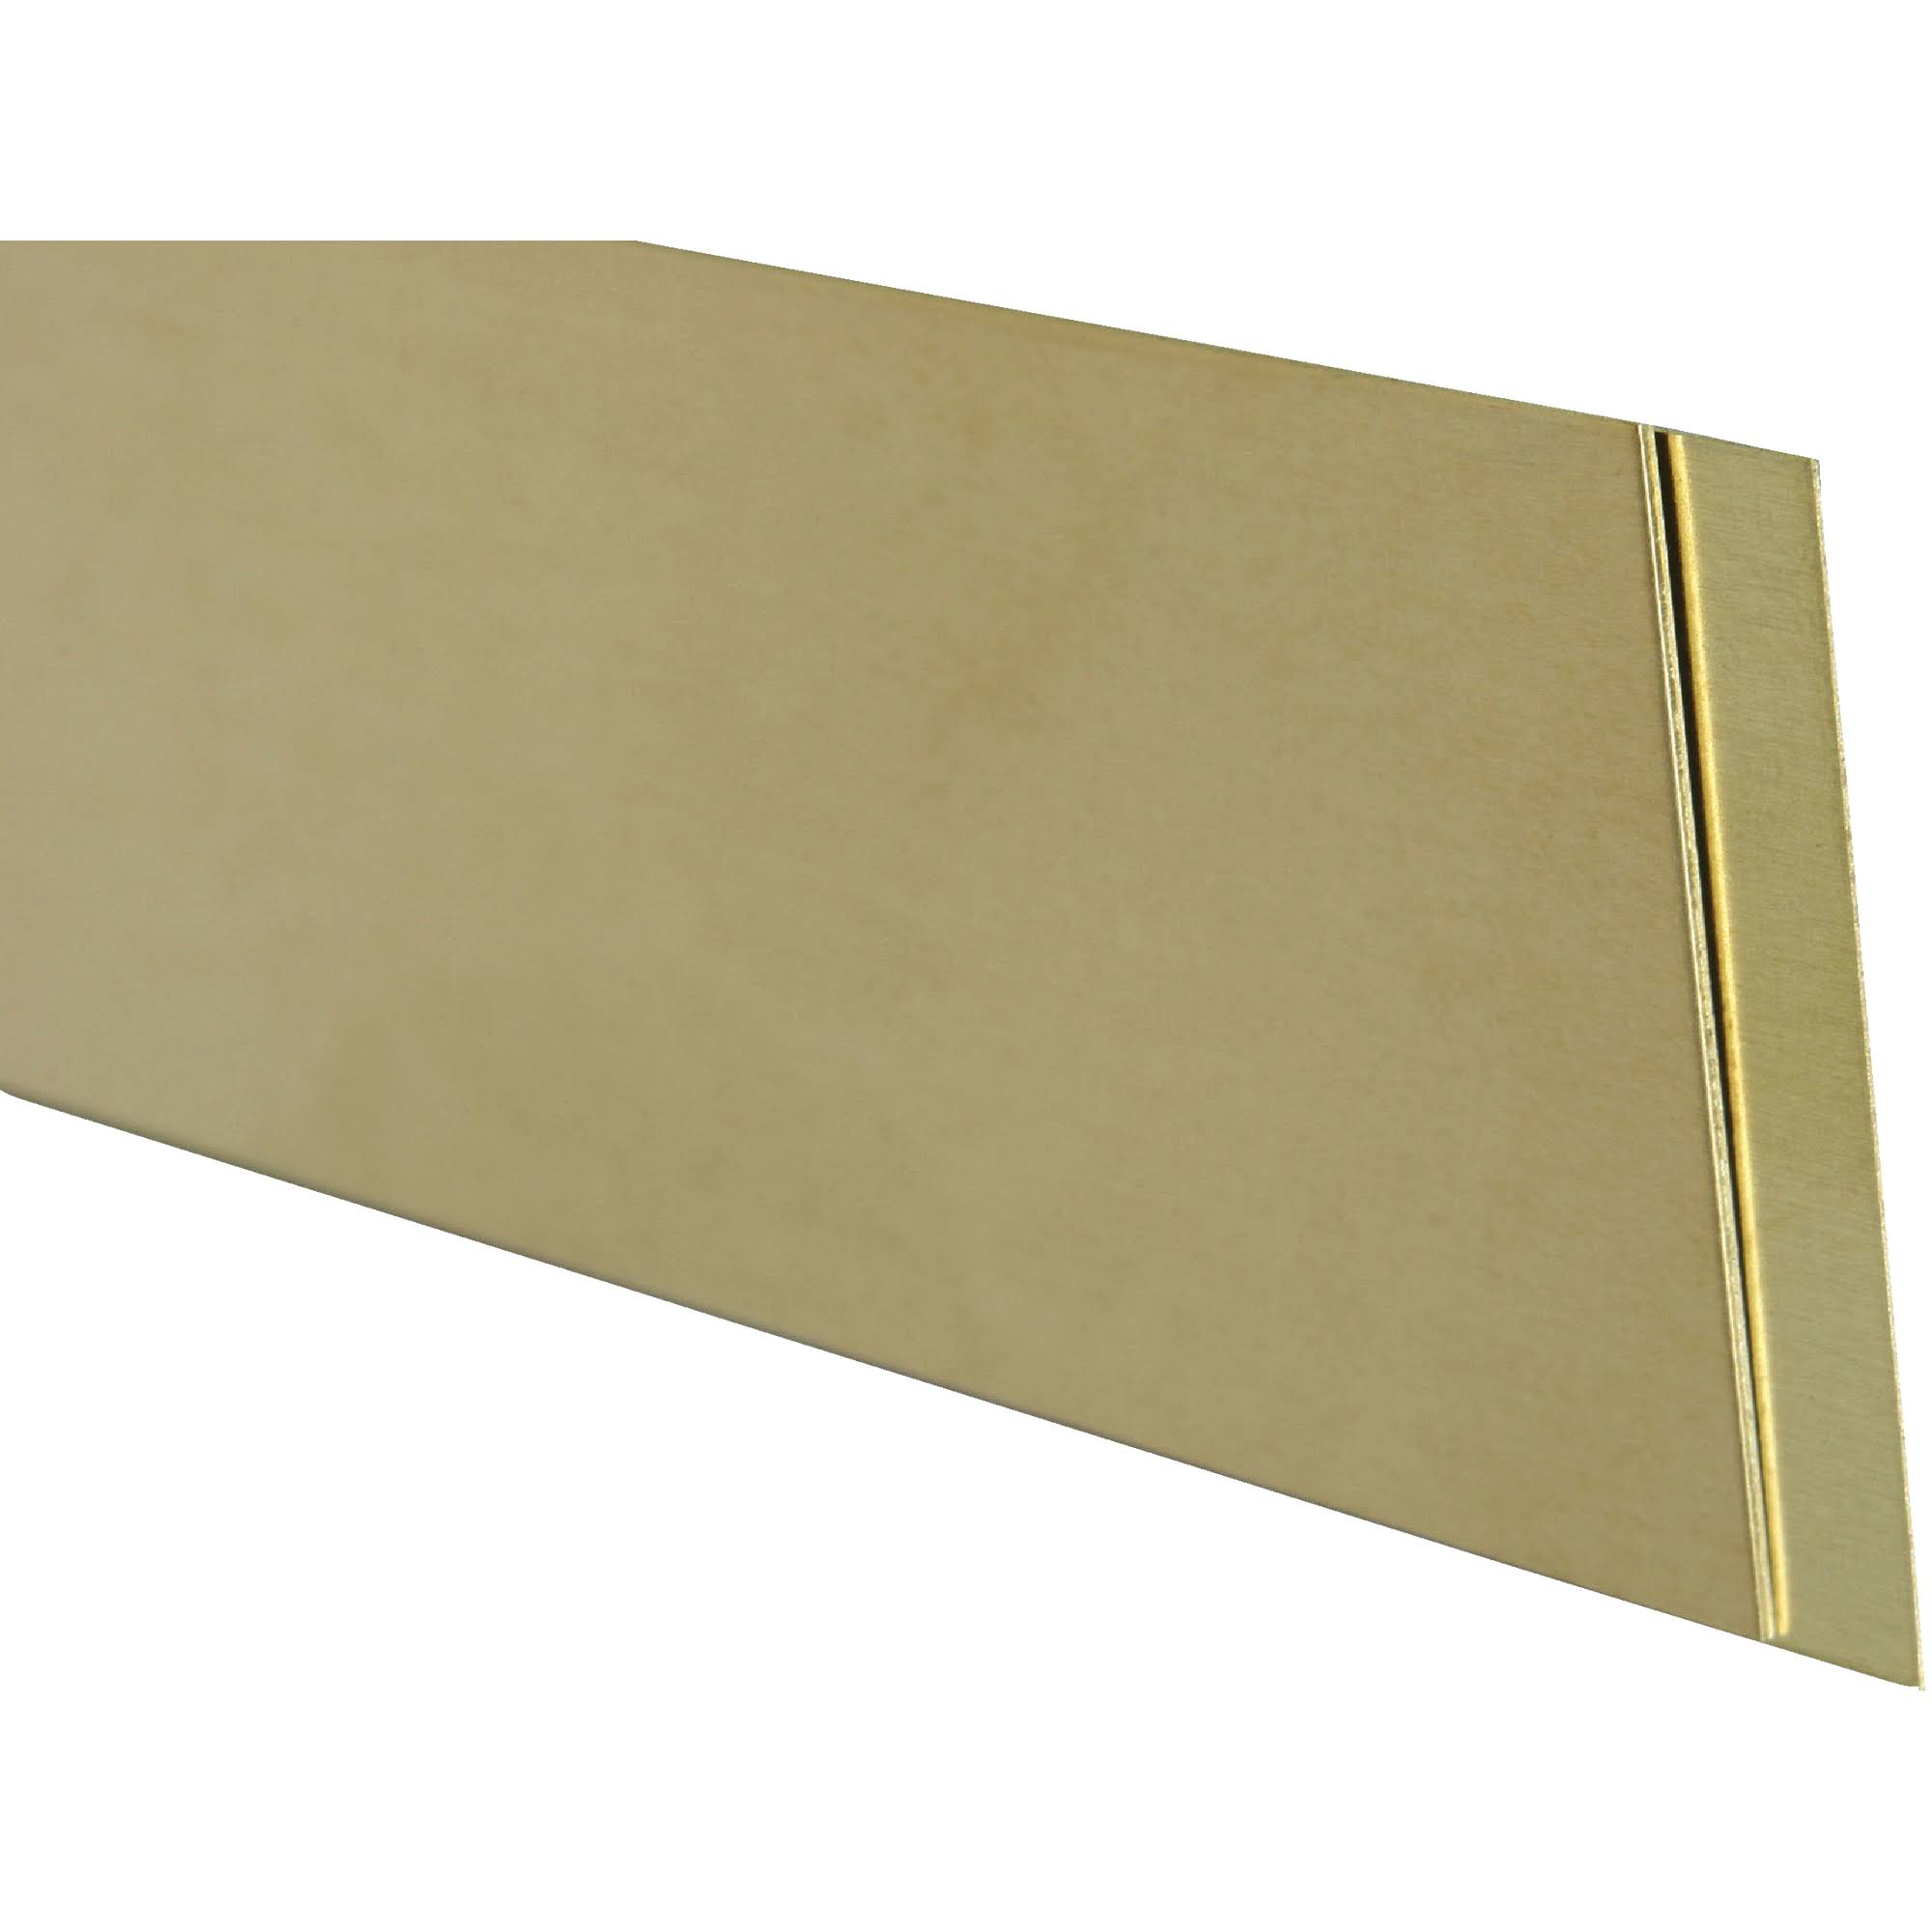 K and S Engineering Brass Strips - 0.093" x 1/4" x 12"